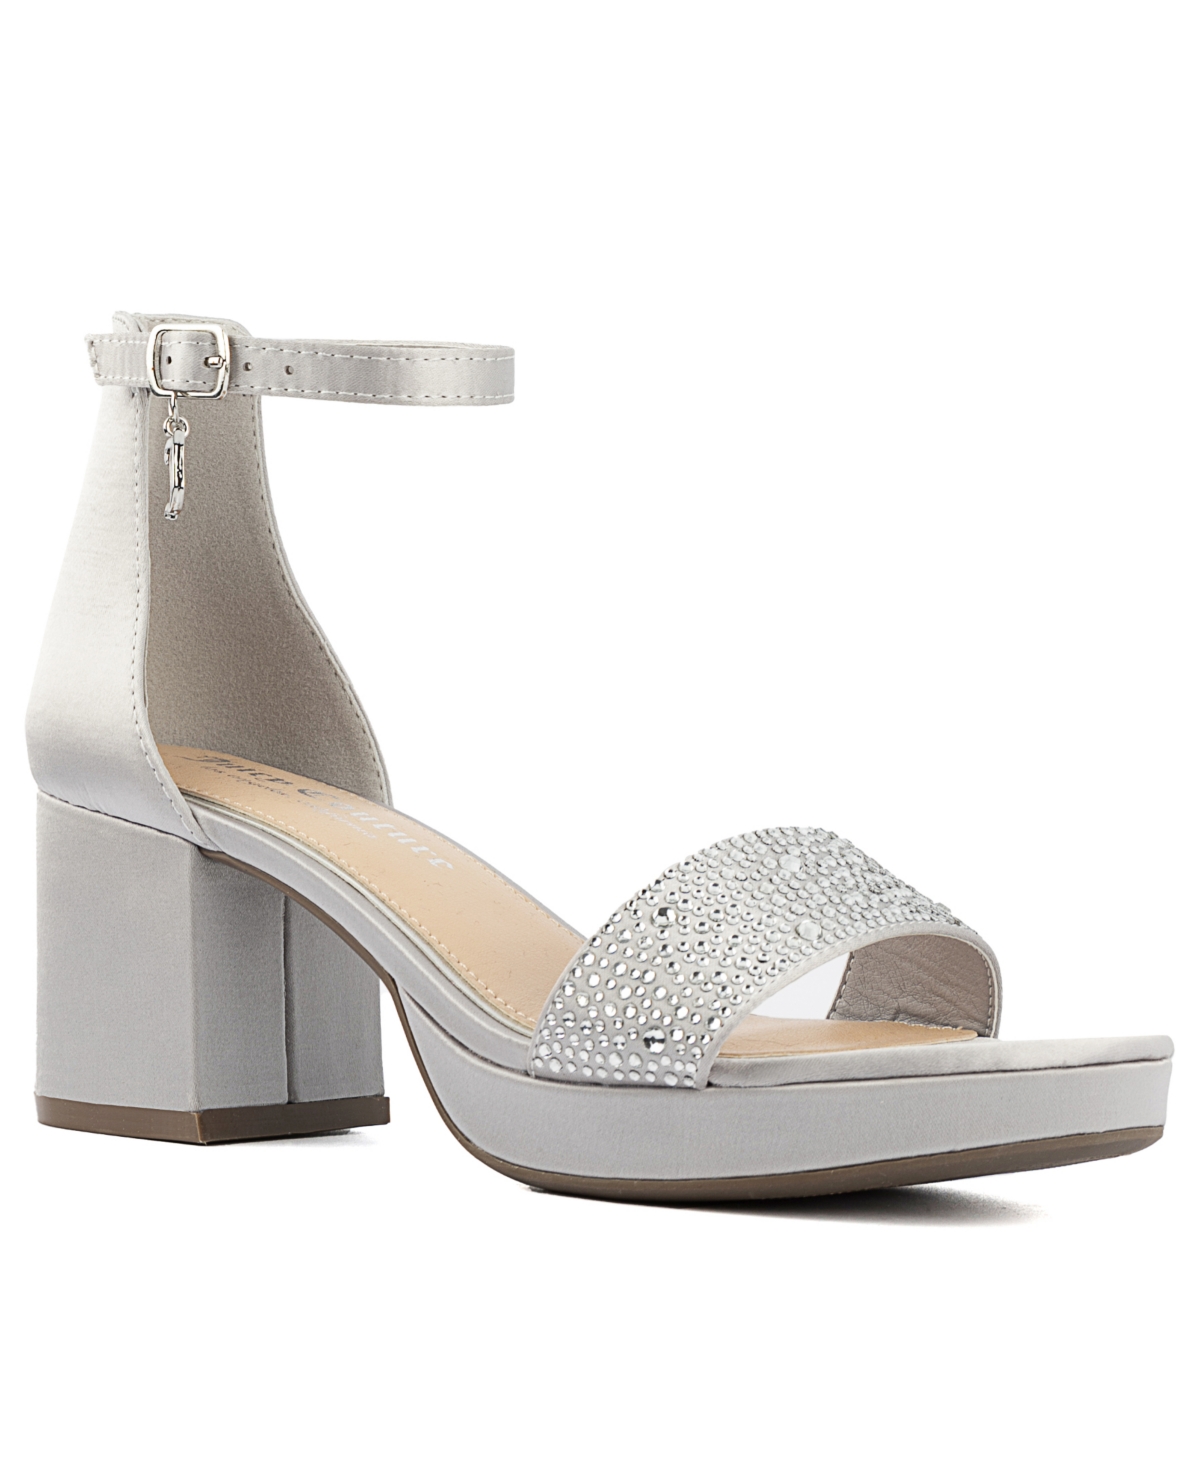 Juicy Couture Women's Nelly Dress Sandal In Silver Satin